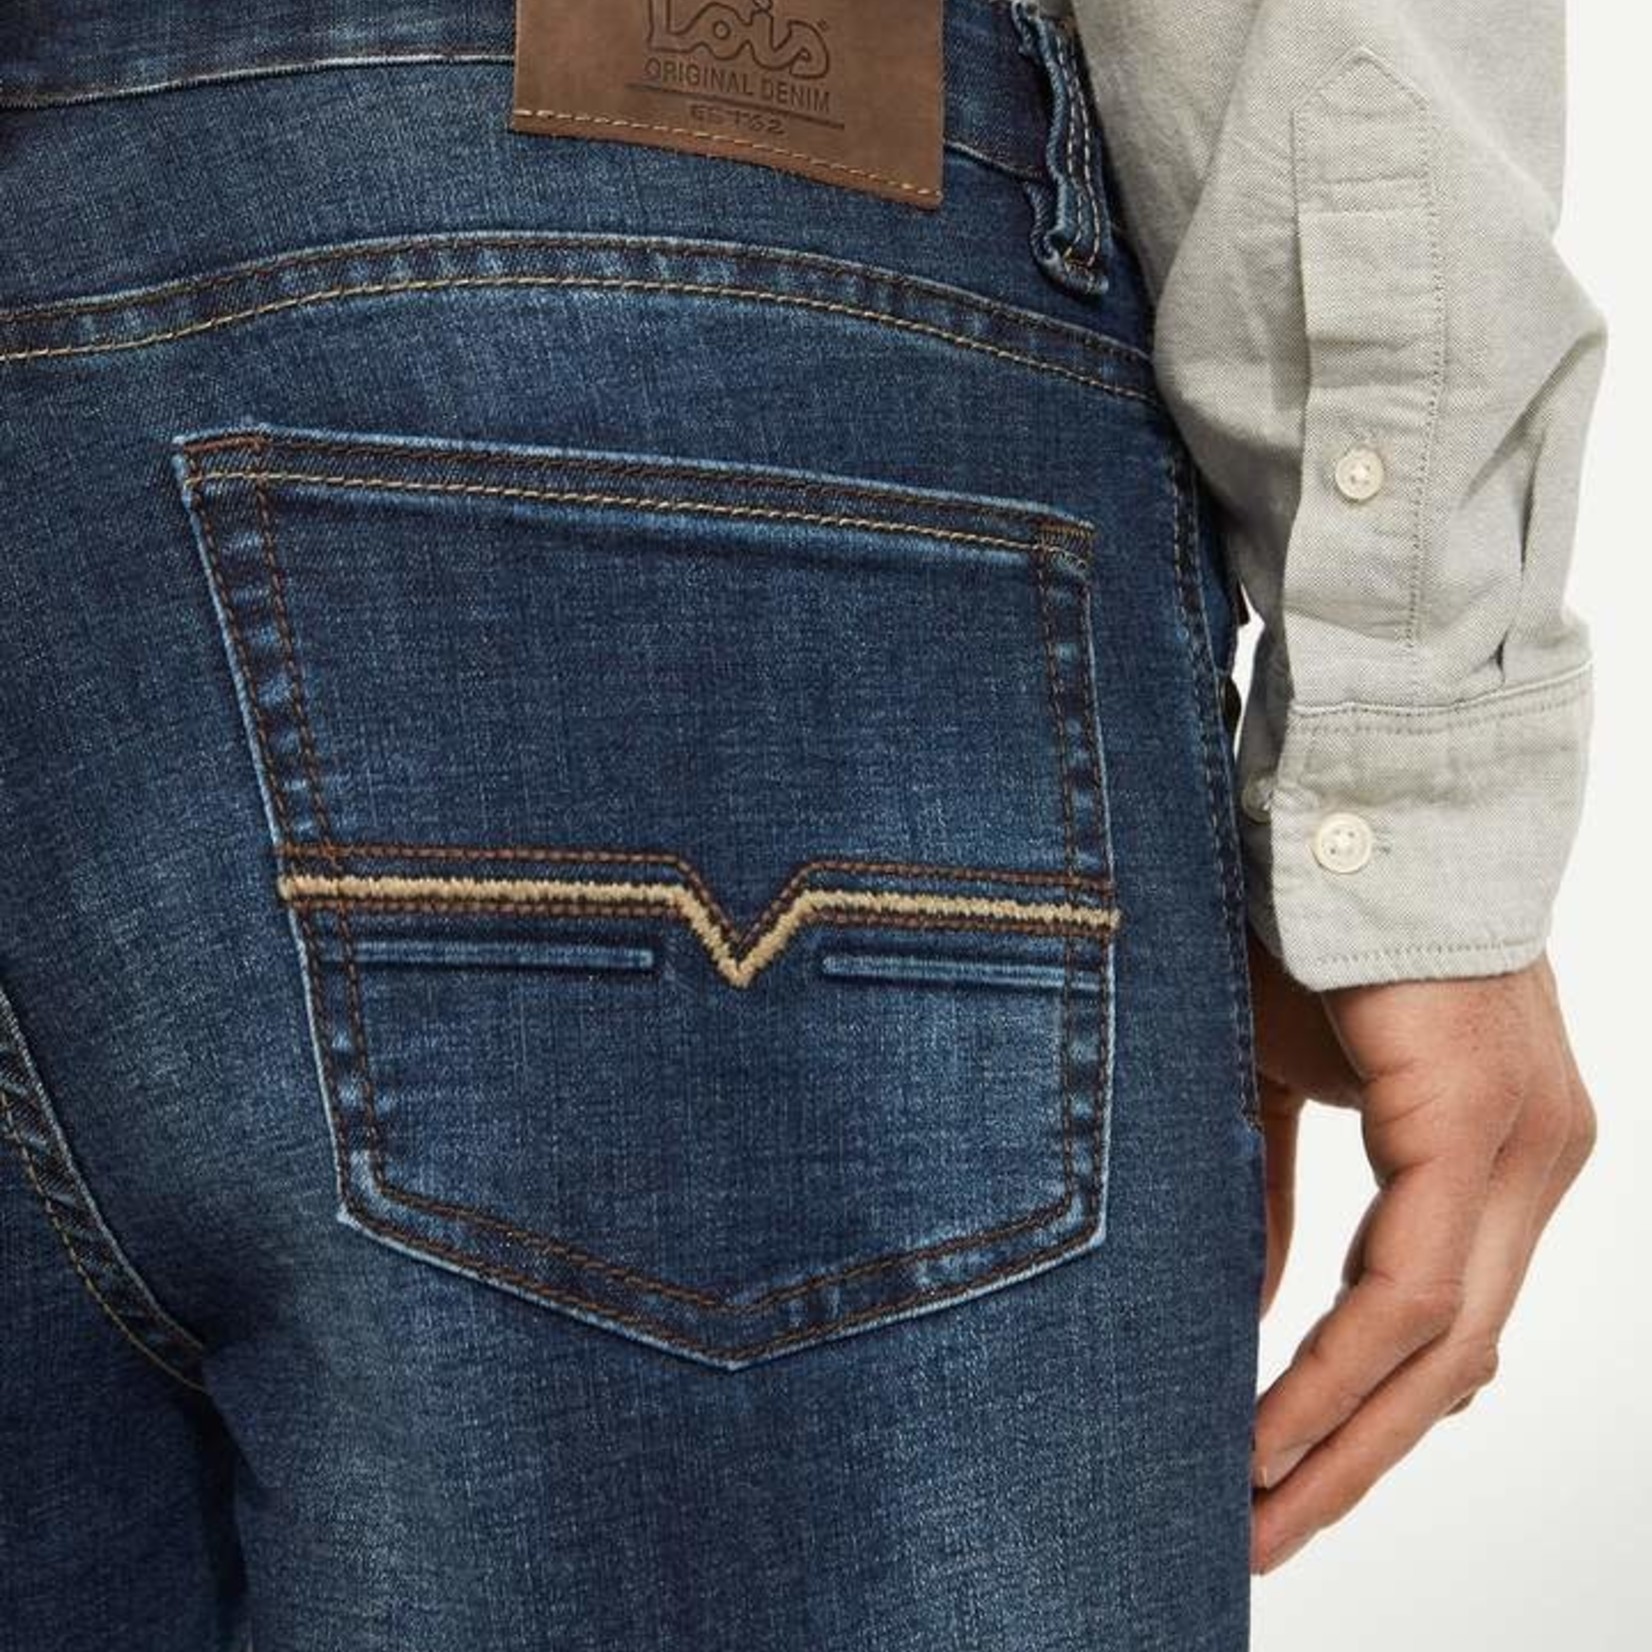 Lois Jeans Canada The "Brad Slim 6378" by Lois Jeans